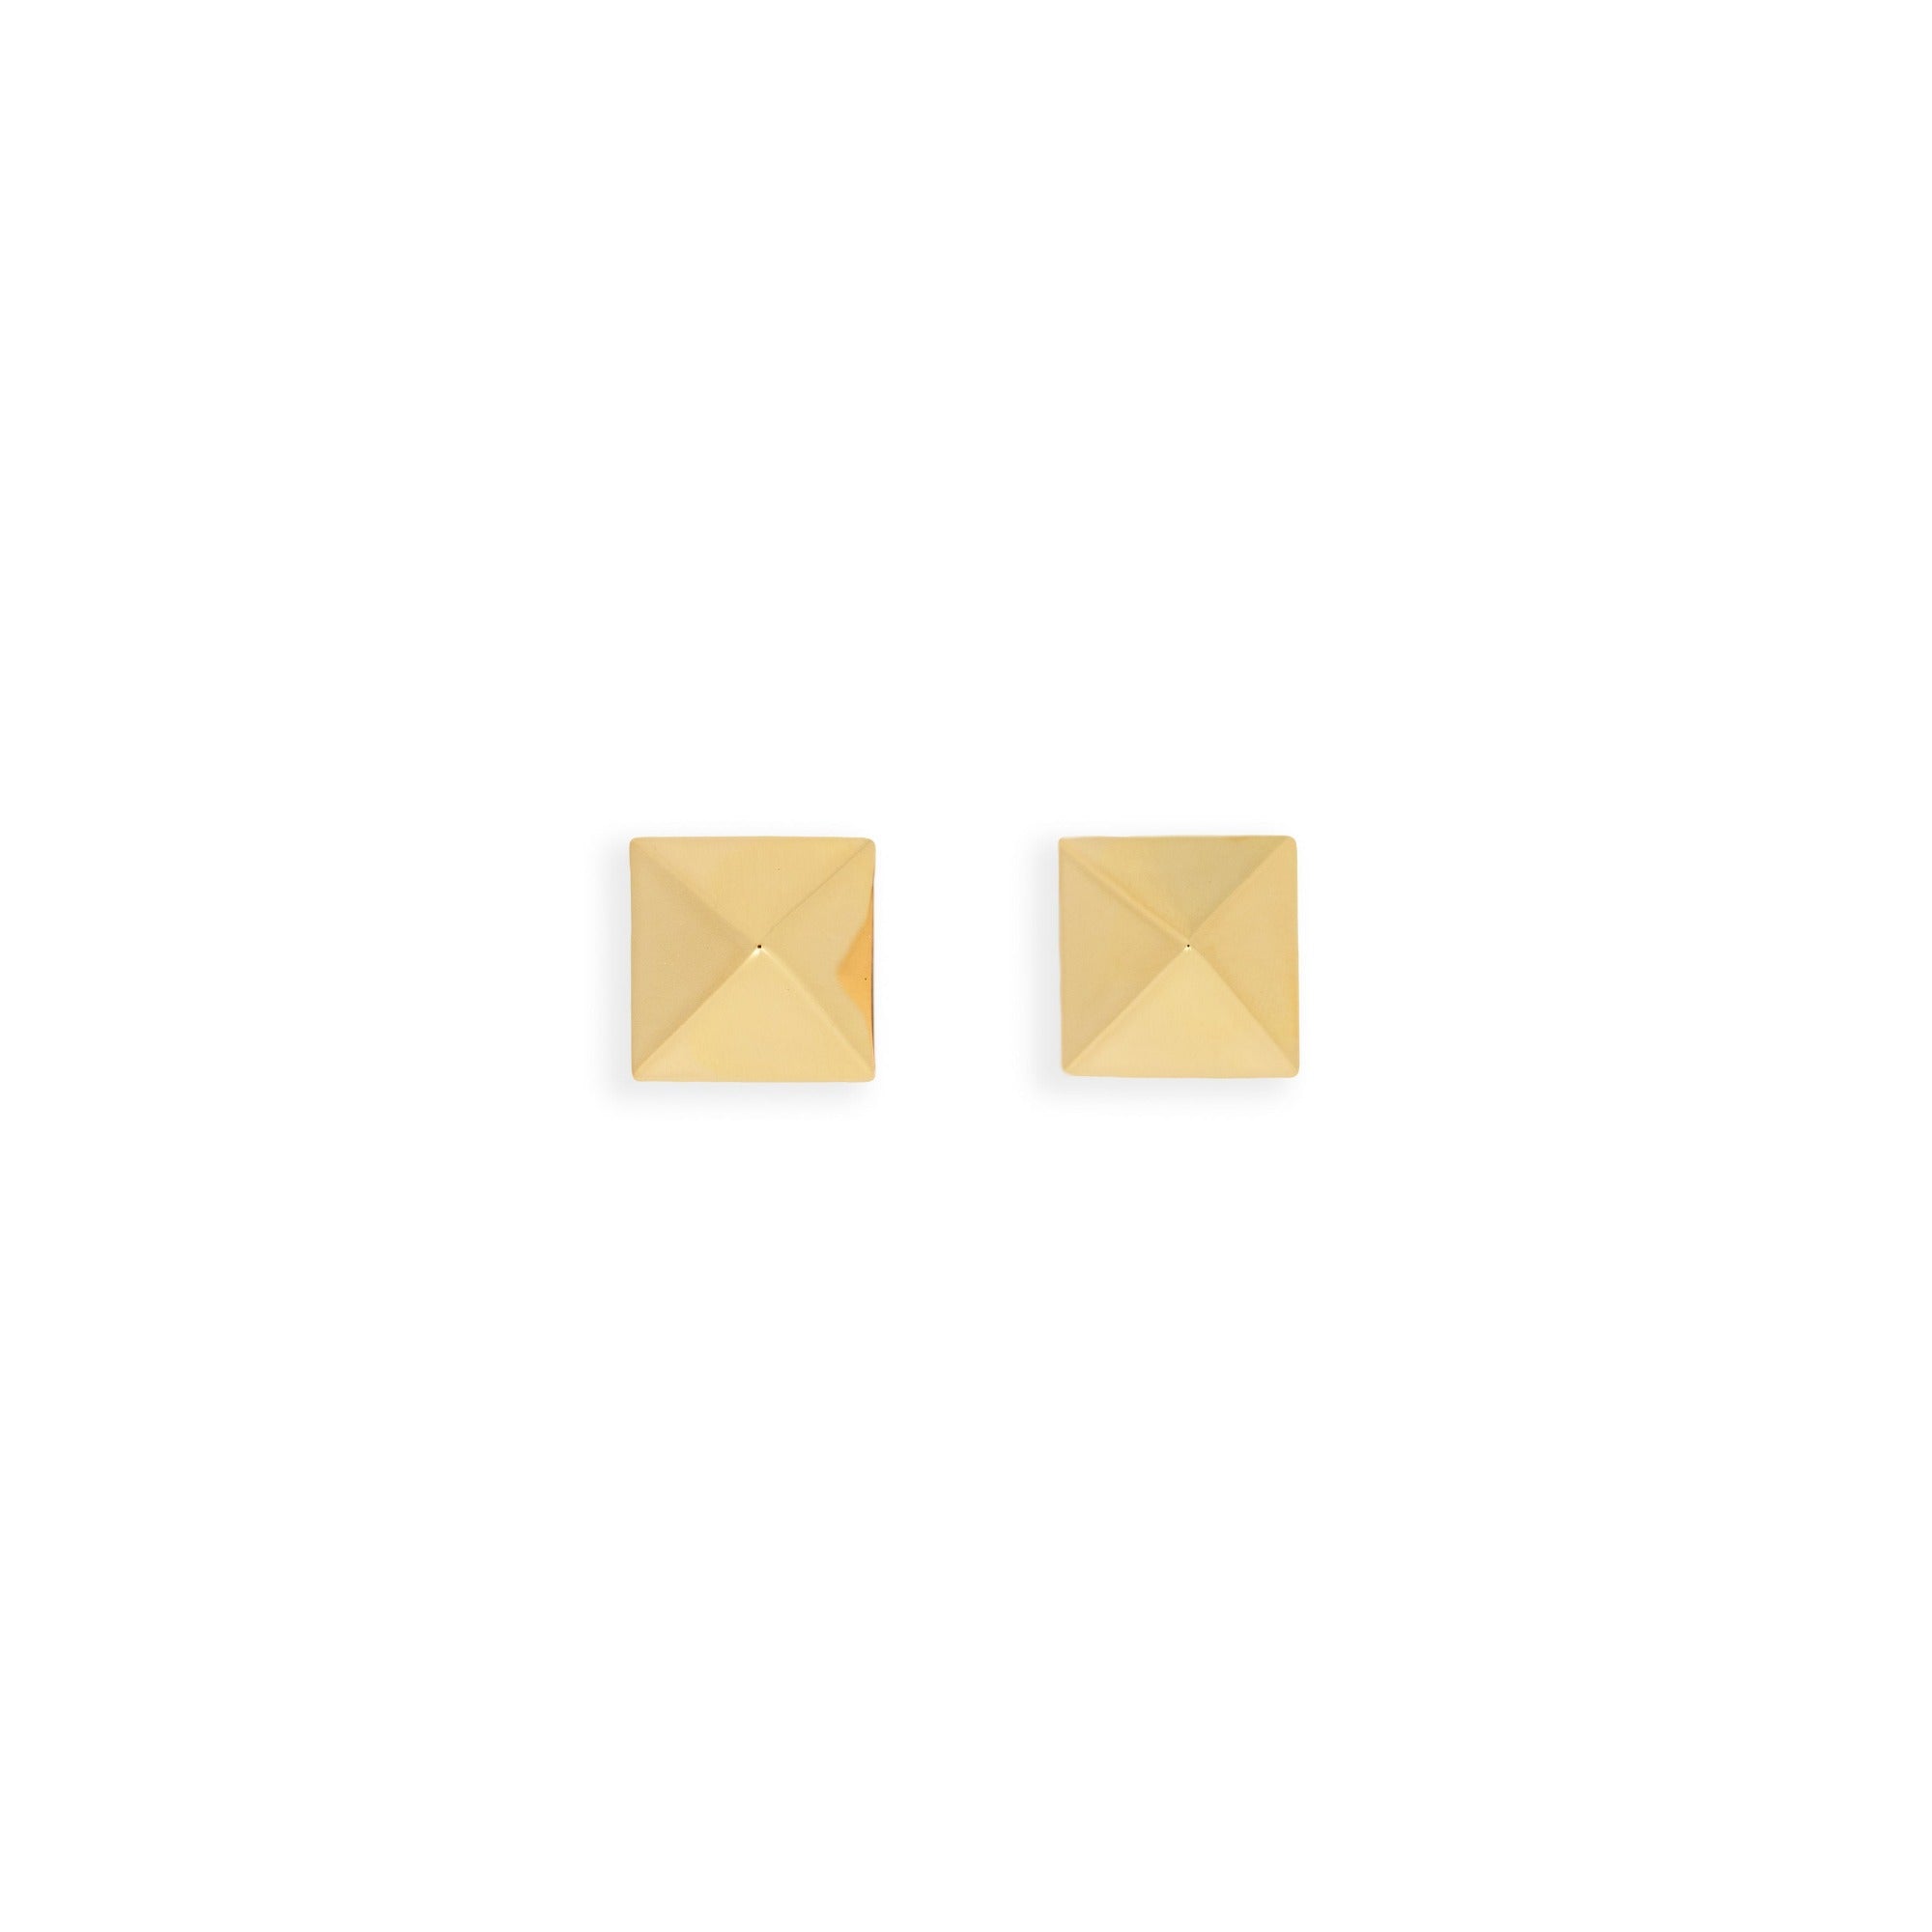 Pyramid Studs - Gold Petite by Erin Fader Jewelry